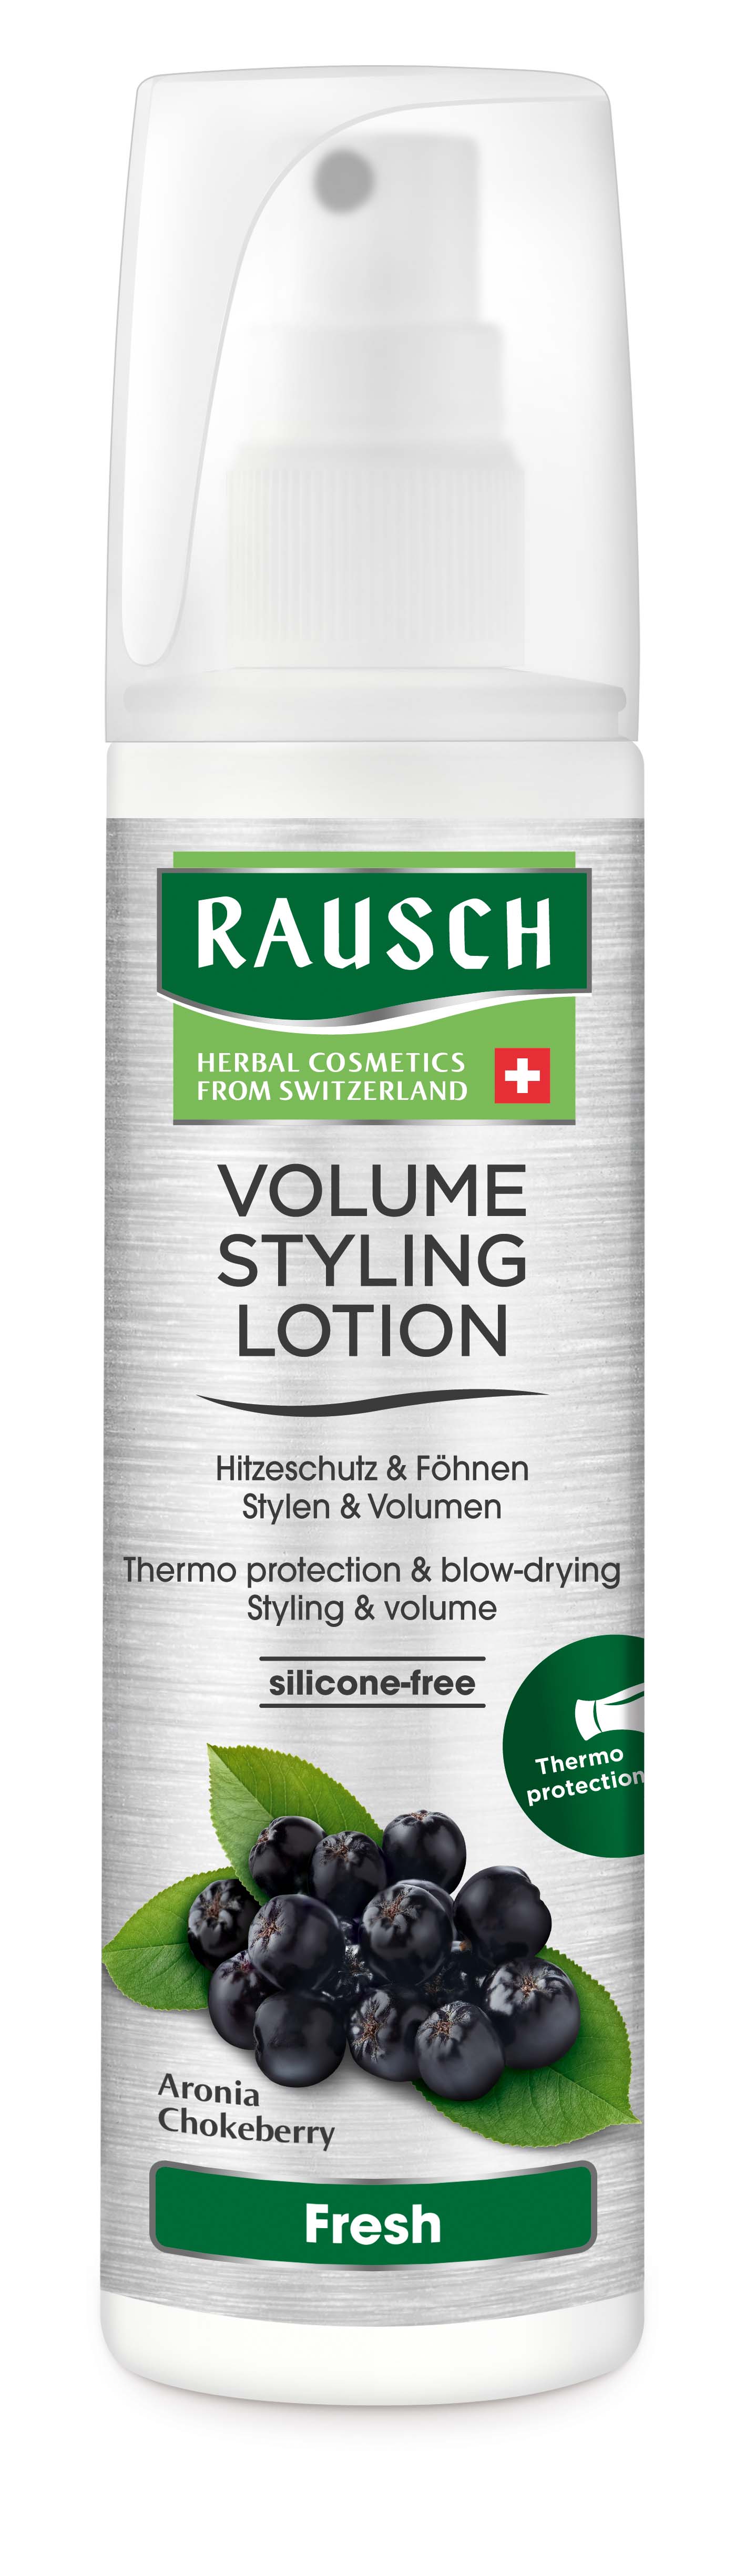 Volume Styling Lotion